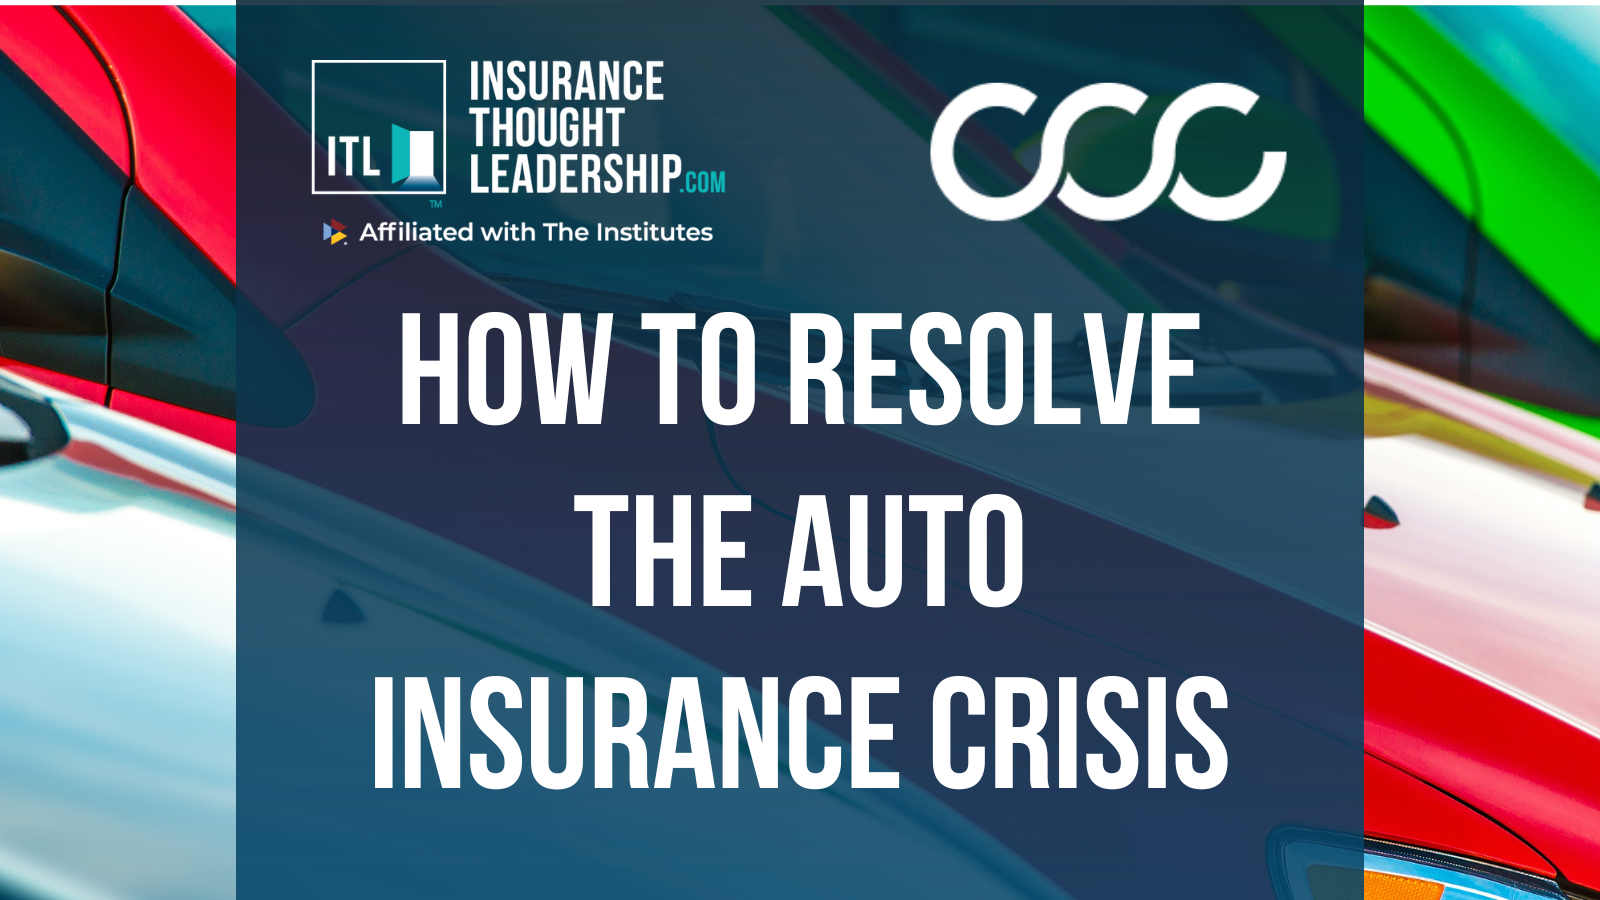 How to Resolve the Auto Insurance Crisis